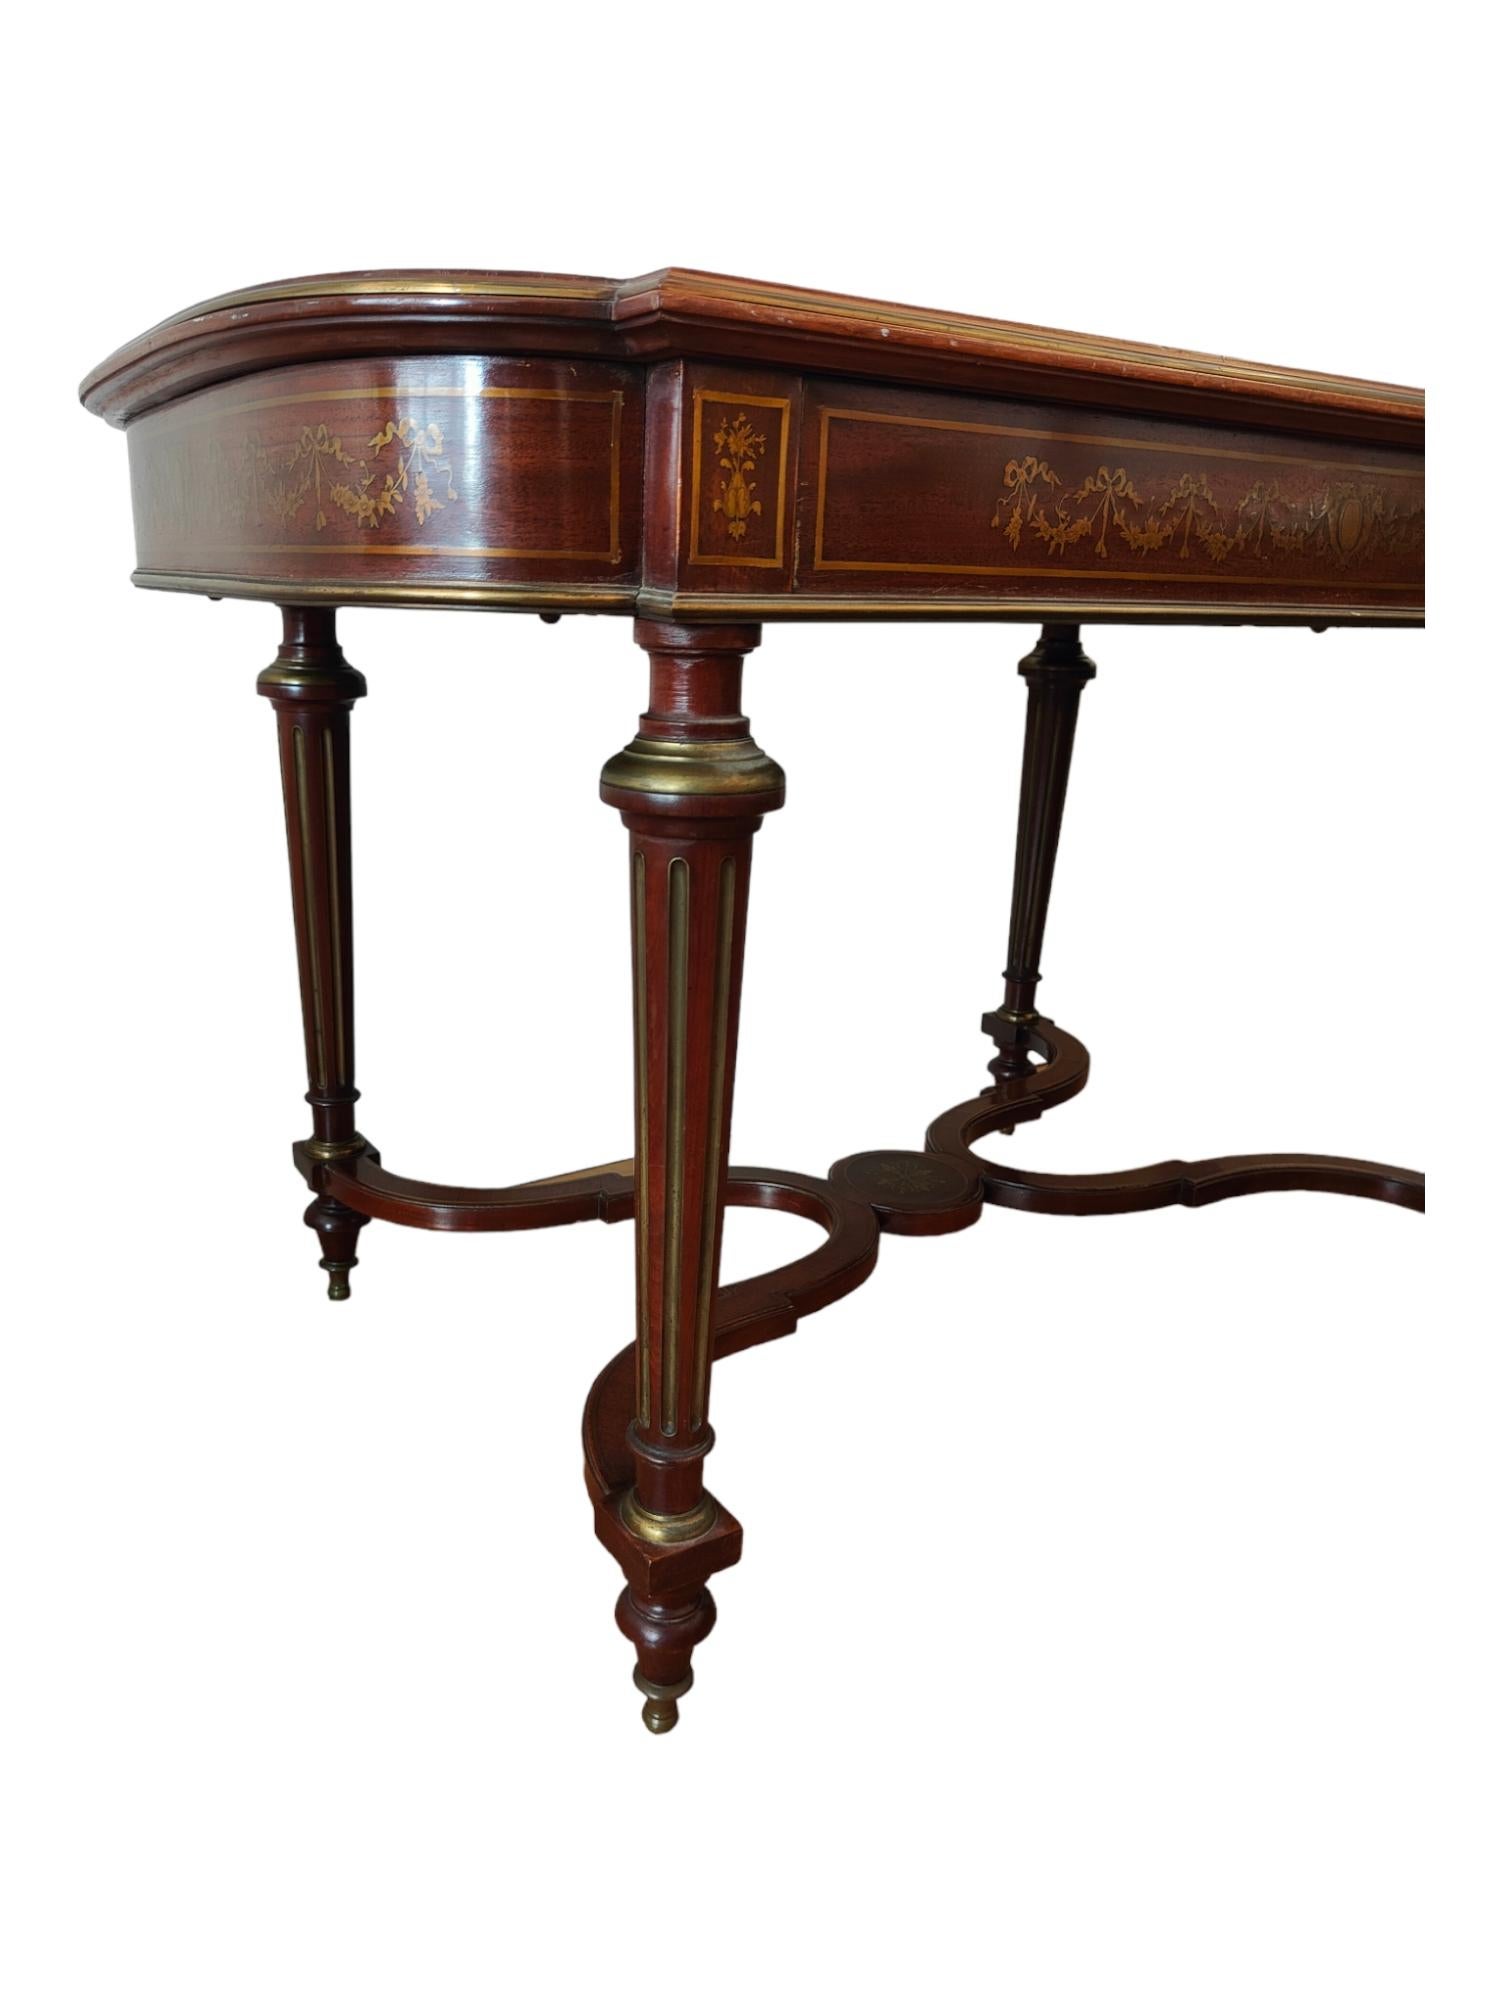 Elegant French Table with Marquetry from the 19th Century For Sale 6